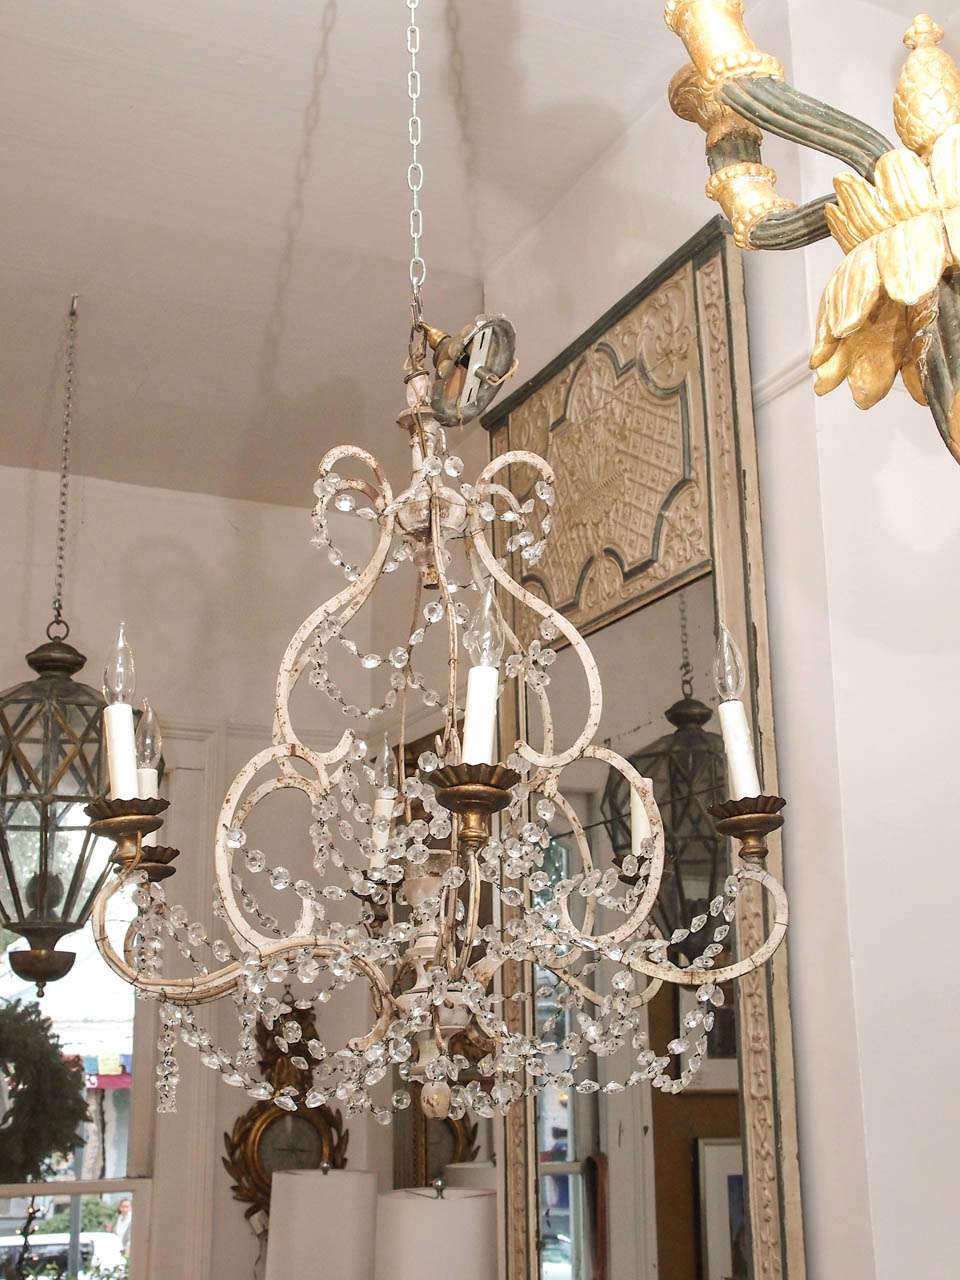 Delicate chandelier with six lights, a painted iron frame, crystal swags and a center wooden posts.